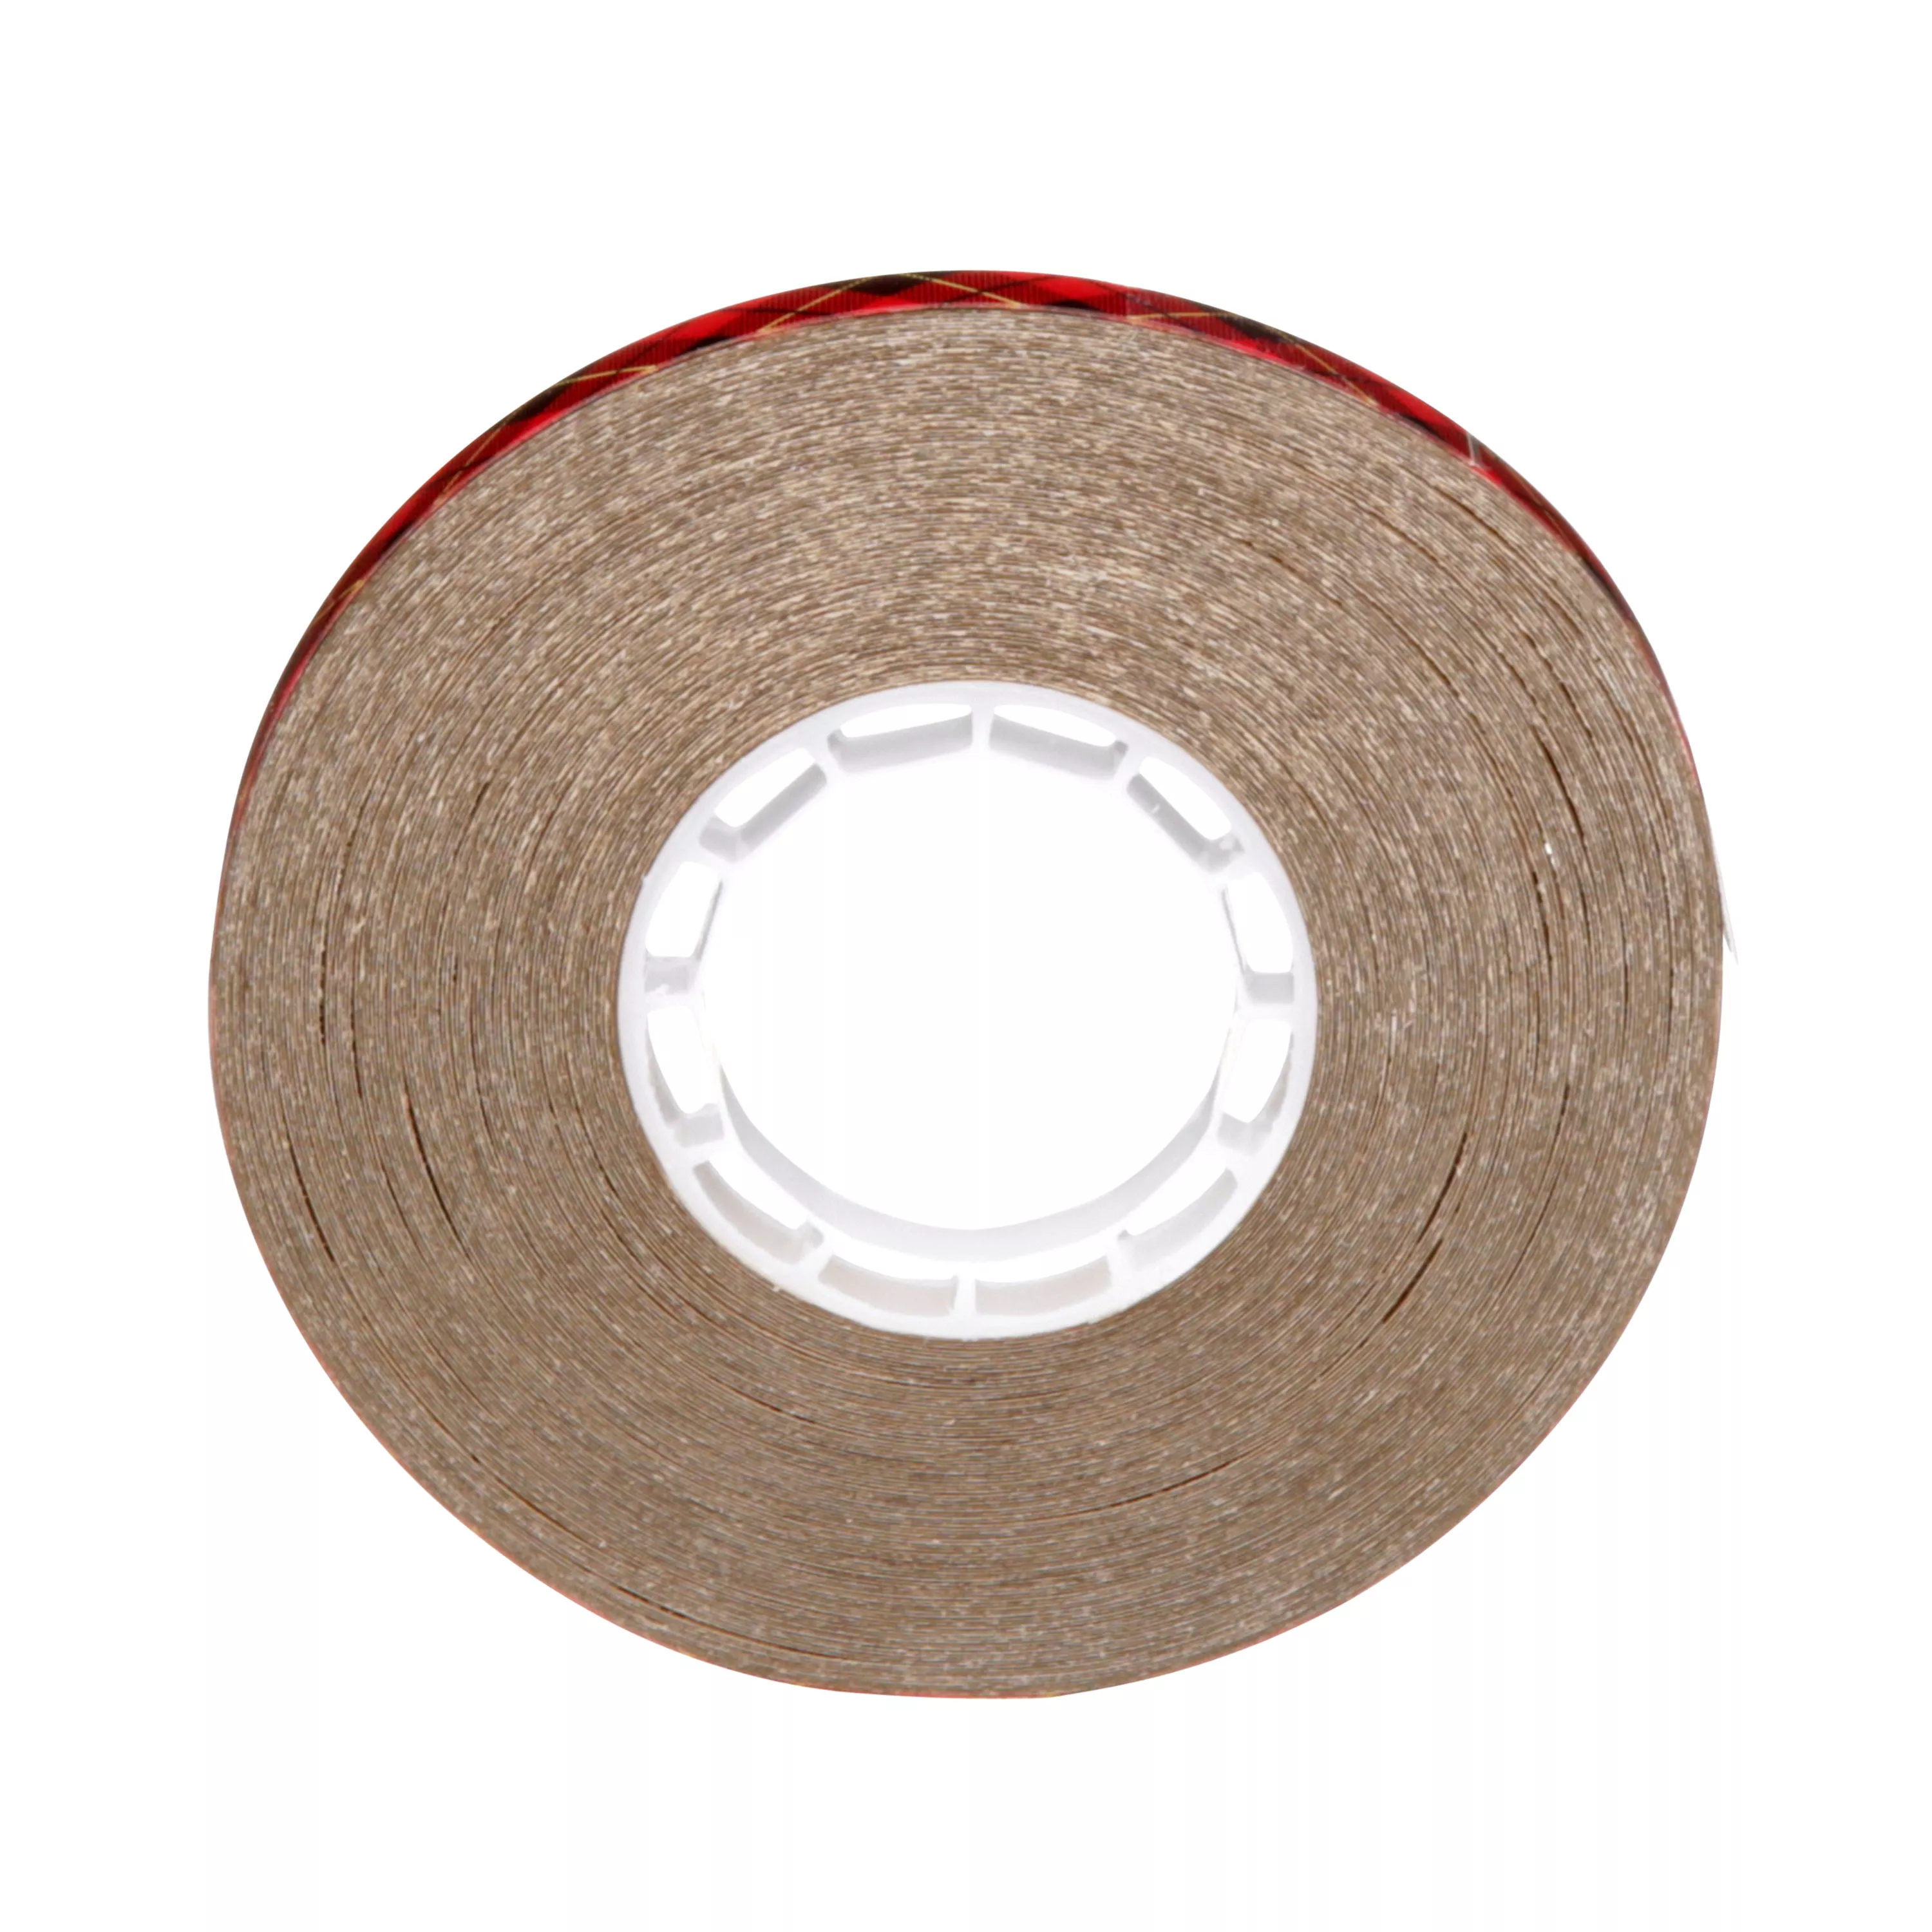 Product Number 969 | Scotch® ATG Adhesive Transfer Tape 969